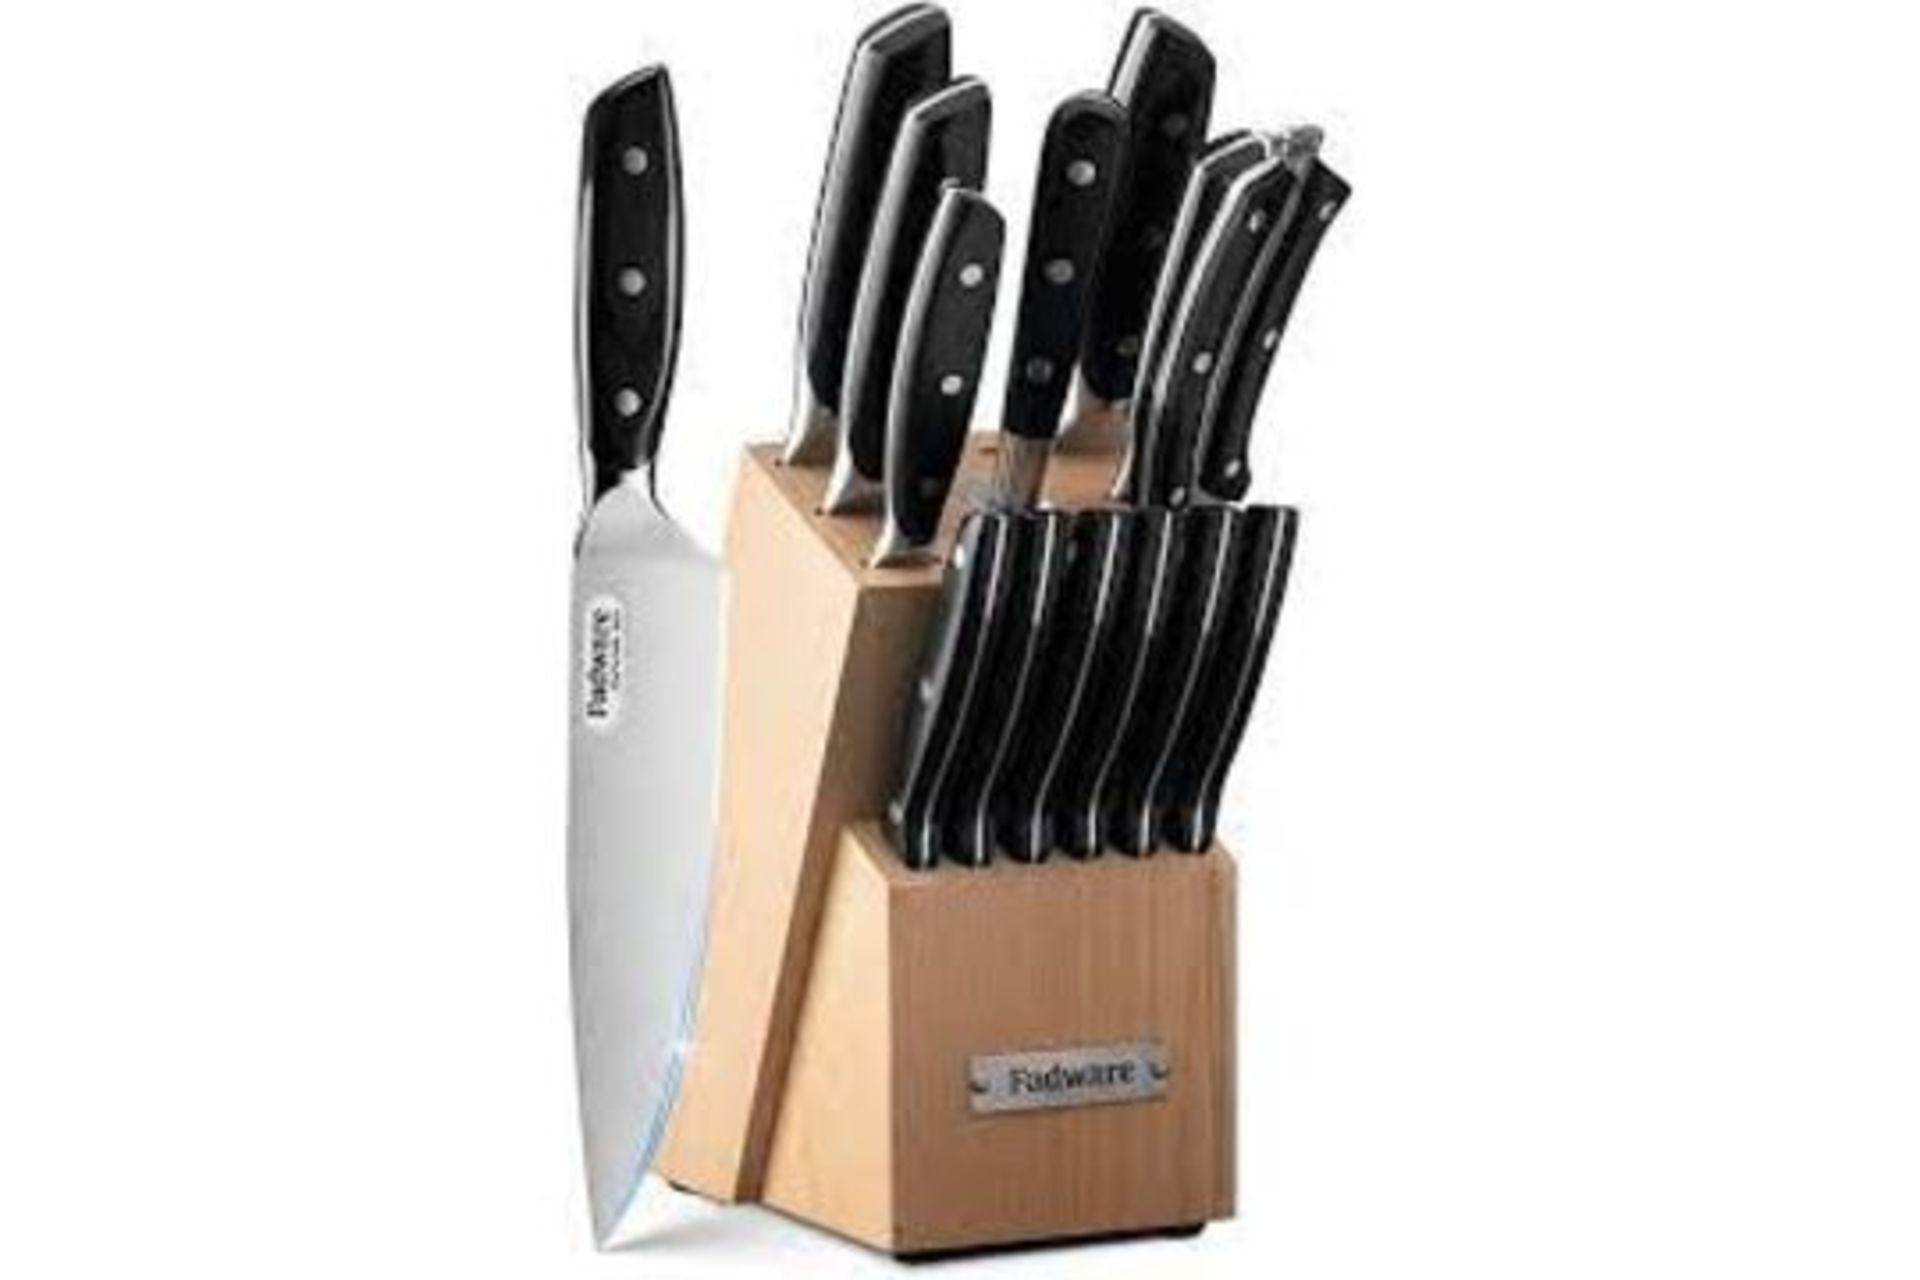 BRAND NEW FADWARE PREMIUM 14 PIECE KNIFE SET WITH KNIFE BLOCK AND SHARPENING STEEL BLACK RRP £149